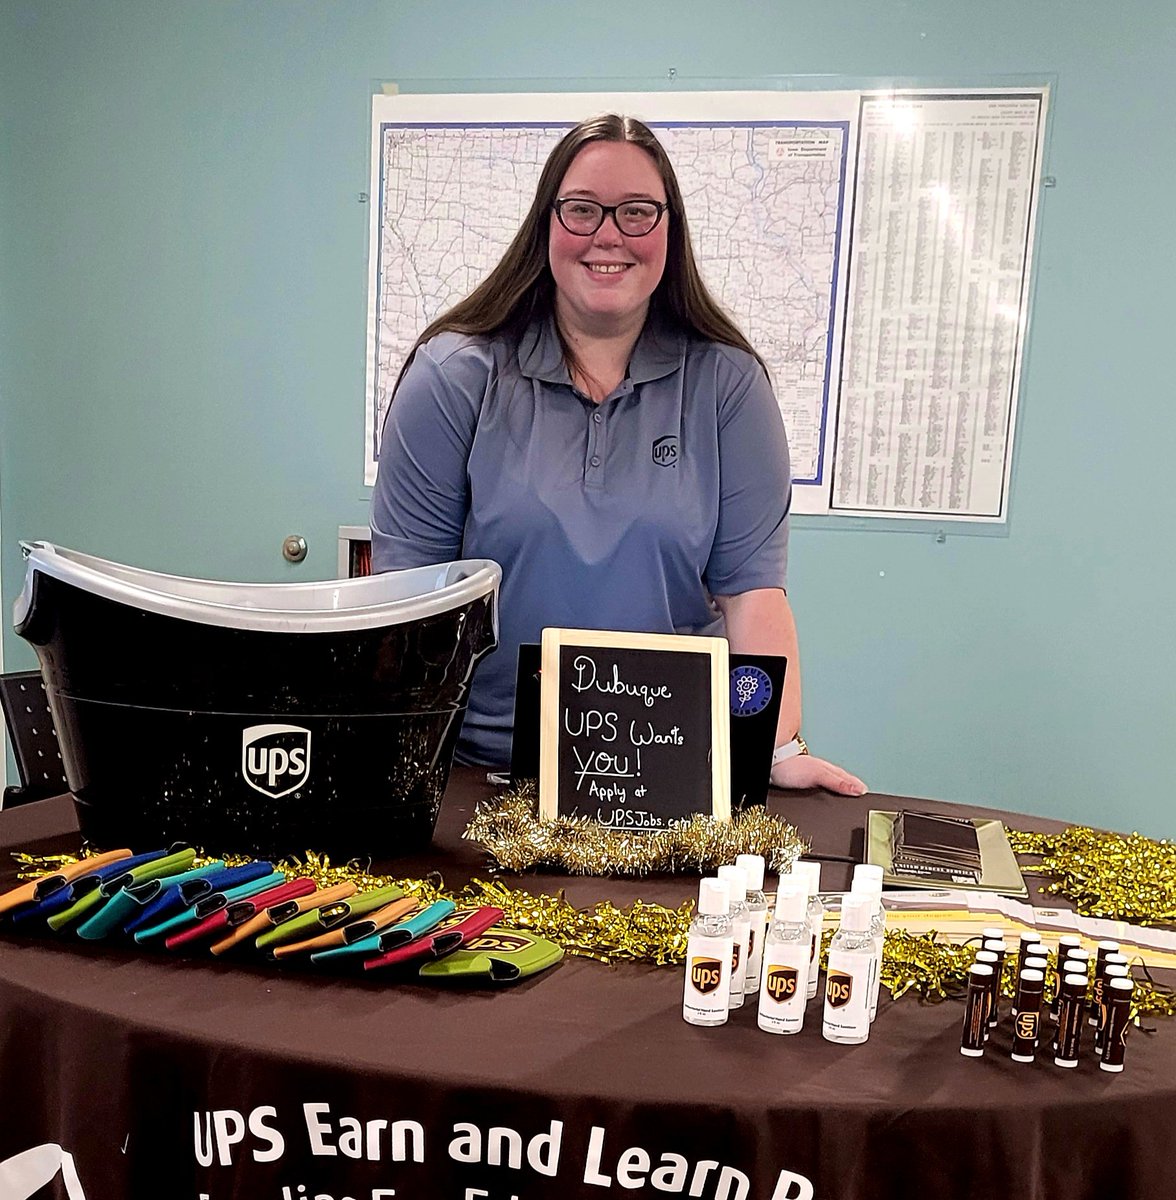 I had a blast representing UPS Dubuque at @DBQIowaWORKS today! @UPSjobs are filling up so apply now at UPSJobs.com/?SRC=Q1107 to be our next @UPSers #ShiftYourWorld #1HRTeam #WestWins @Iowa_UPSJobs @HrPlains @jagrant1020